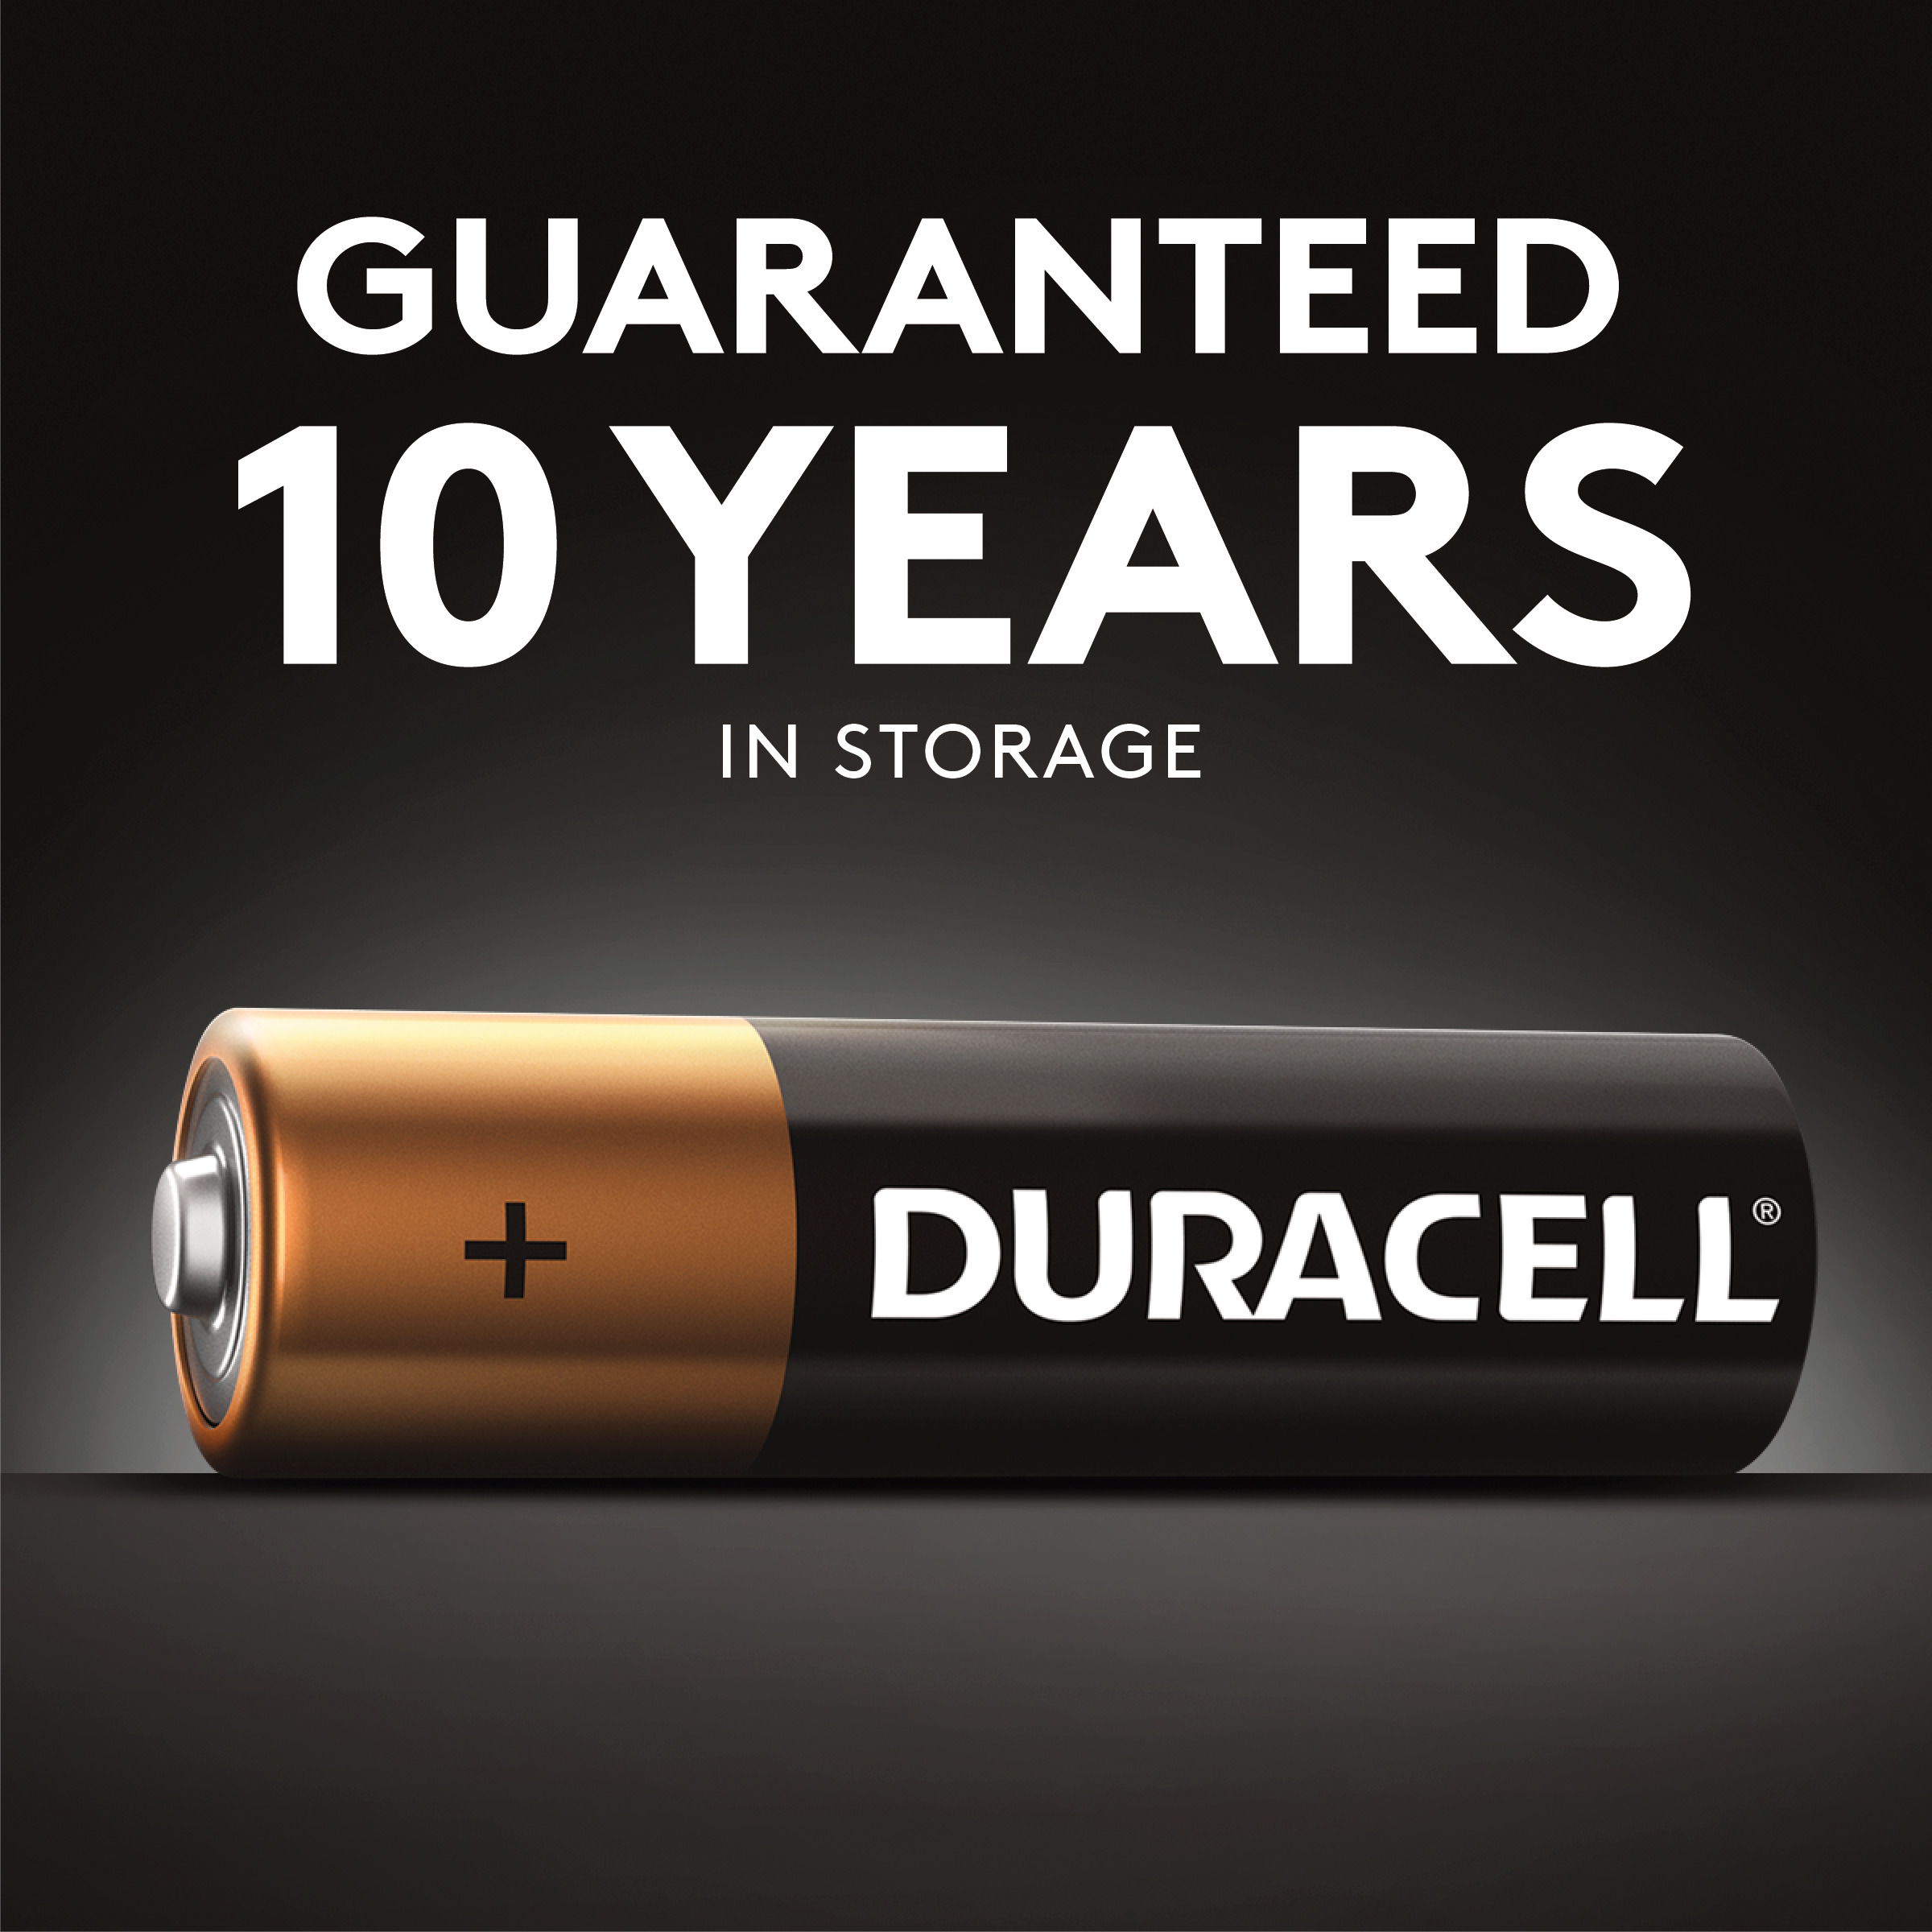 Duracell Coppertop C Battery, Long Lasting C Batteries, 8 Pack - image 4 of 9